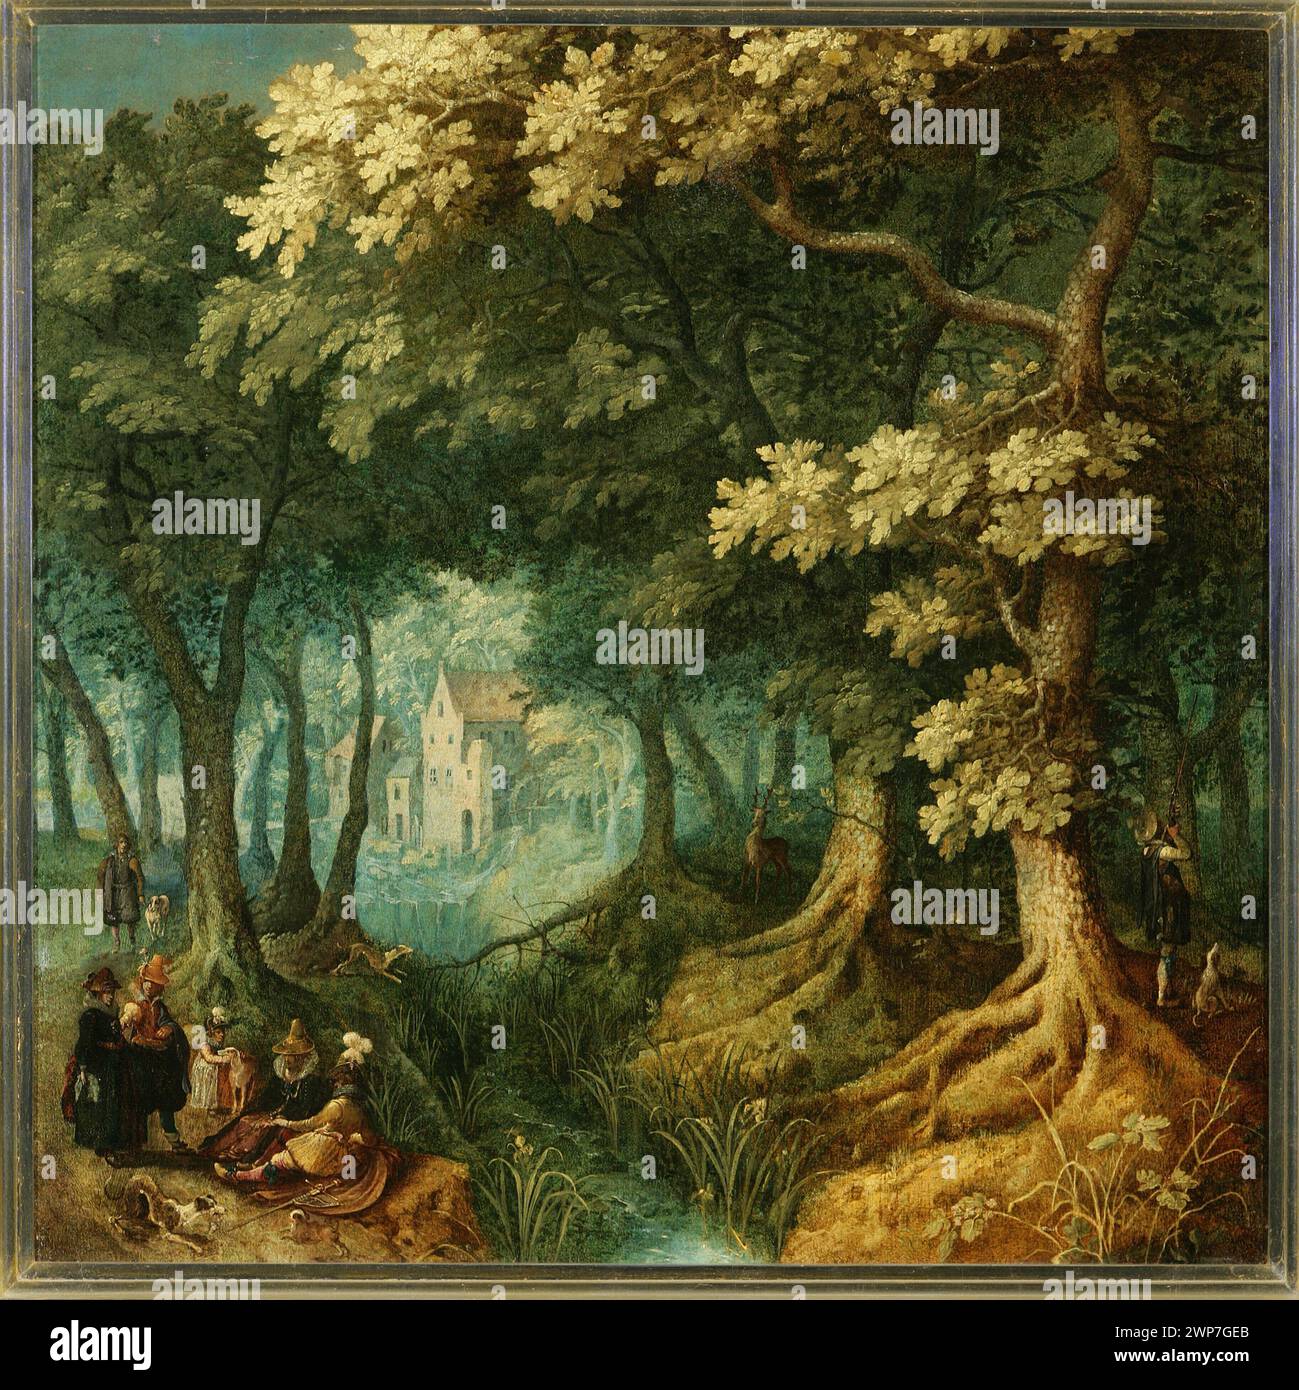 Landscape levy; Coninxloo, Gillis Van, I (1544-1607); early XVII century (1600-00-00-1610-00-00);trees, deer, Flemish painting, landscapes, forest landscapes, figures, dogs, streams, buildings Stock Photo